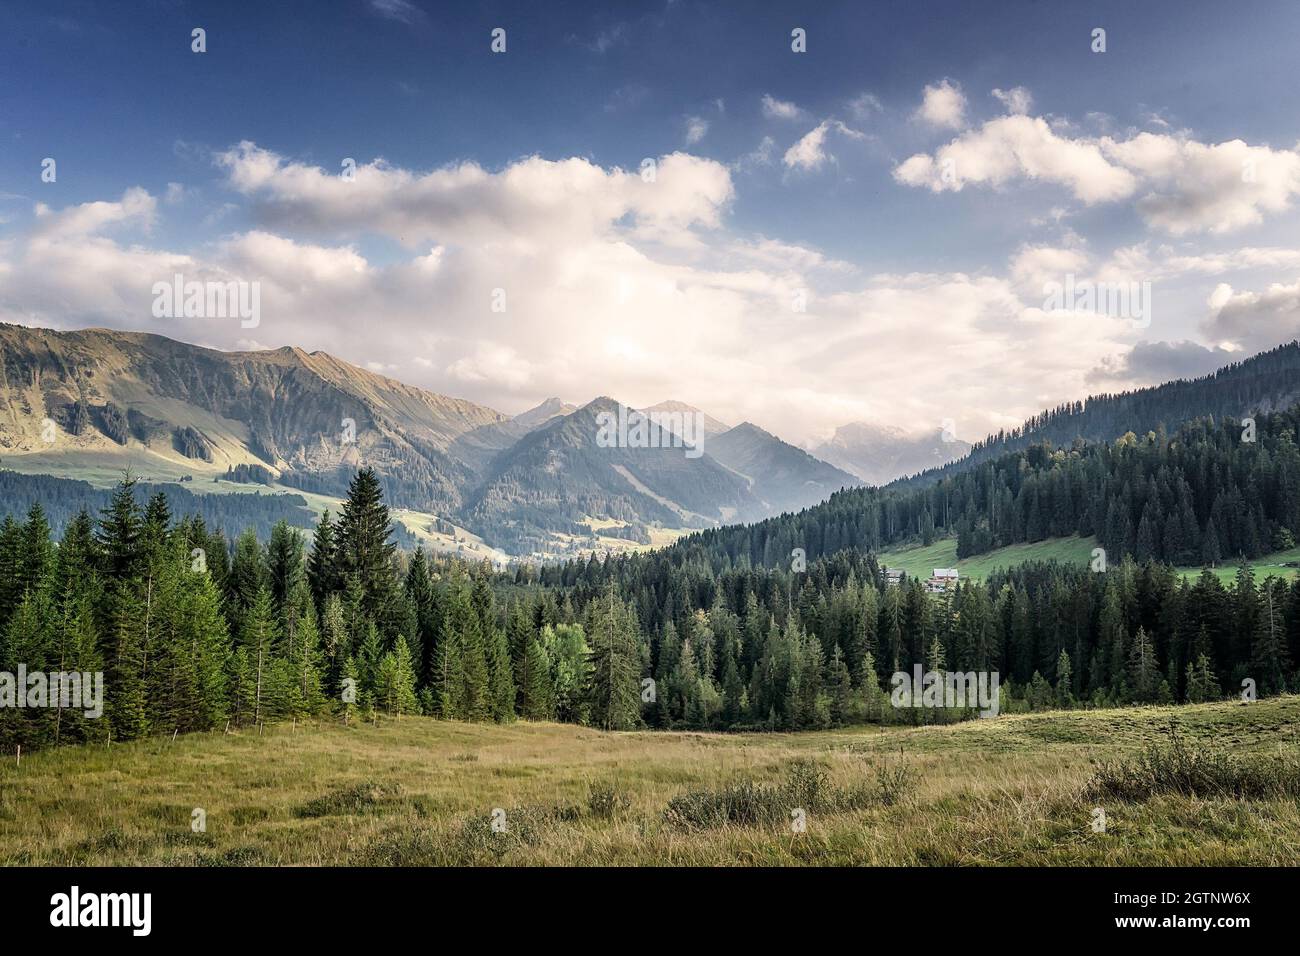 Scenic View Of Mountains Against Sky Stock Photo